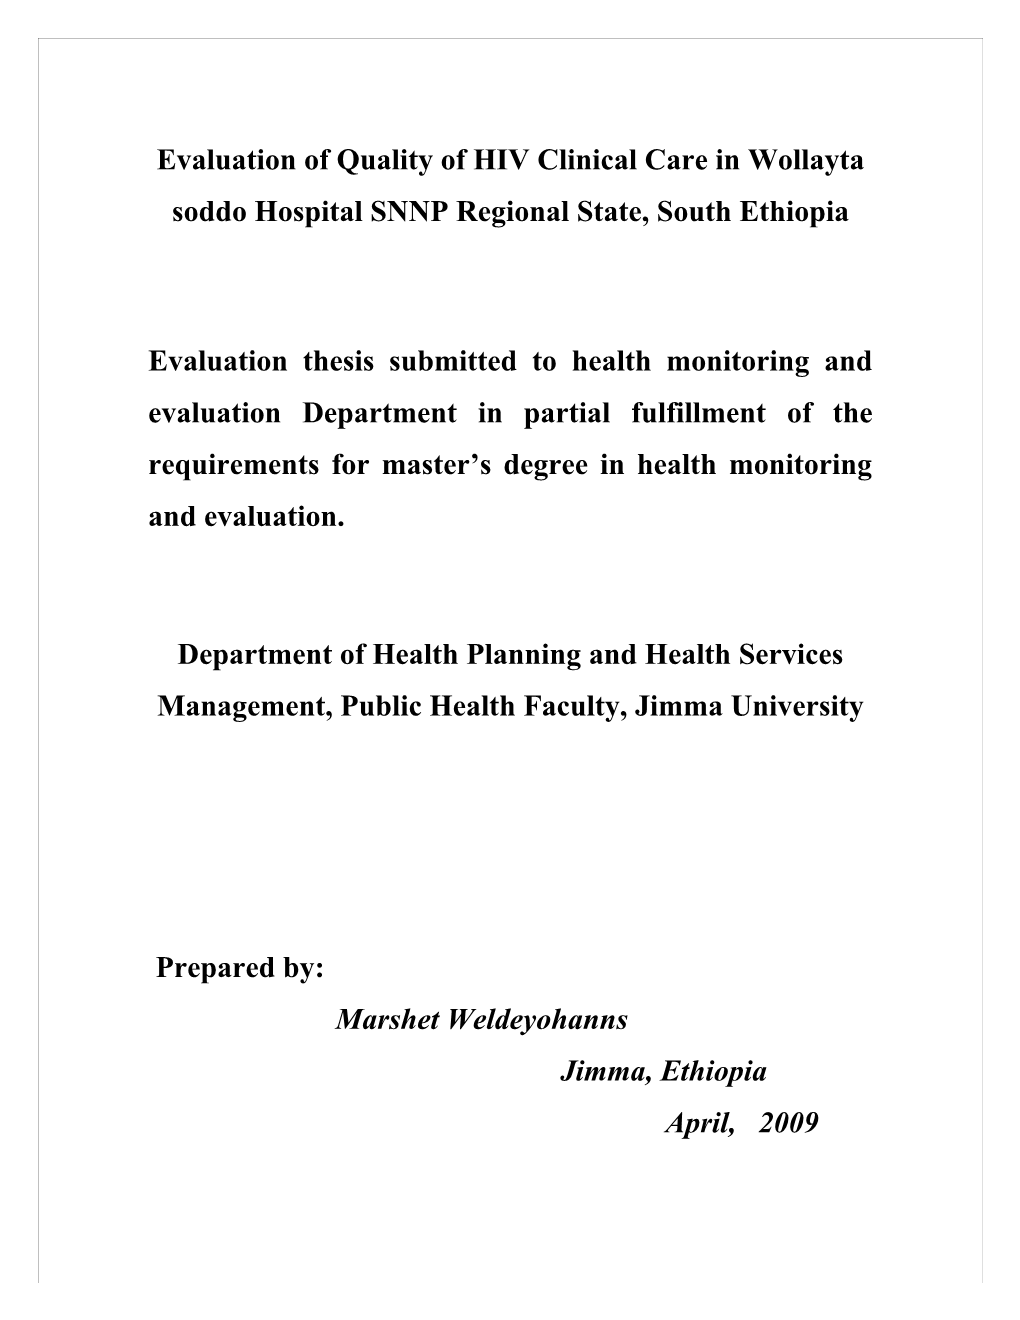 Process Evaluation of Quality of HIV Clinical Care in Wollayta Soddo Hospital